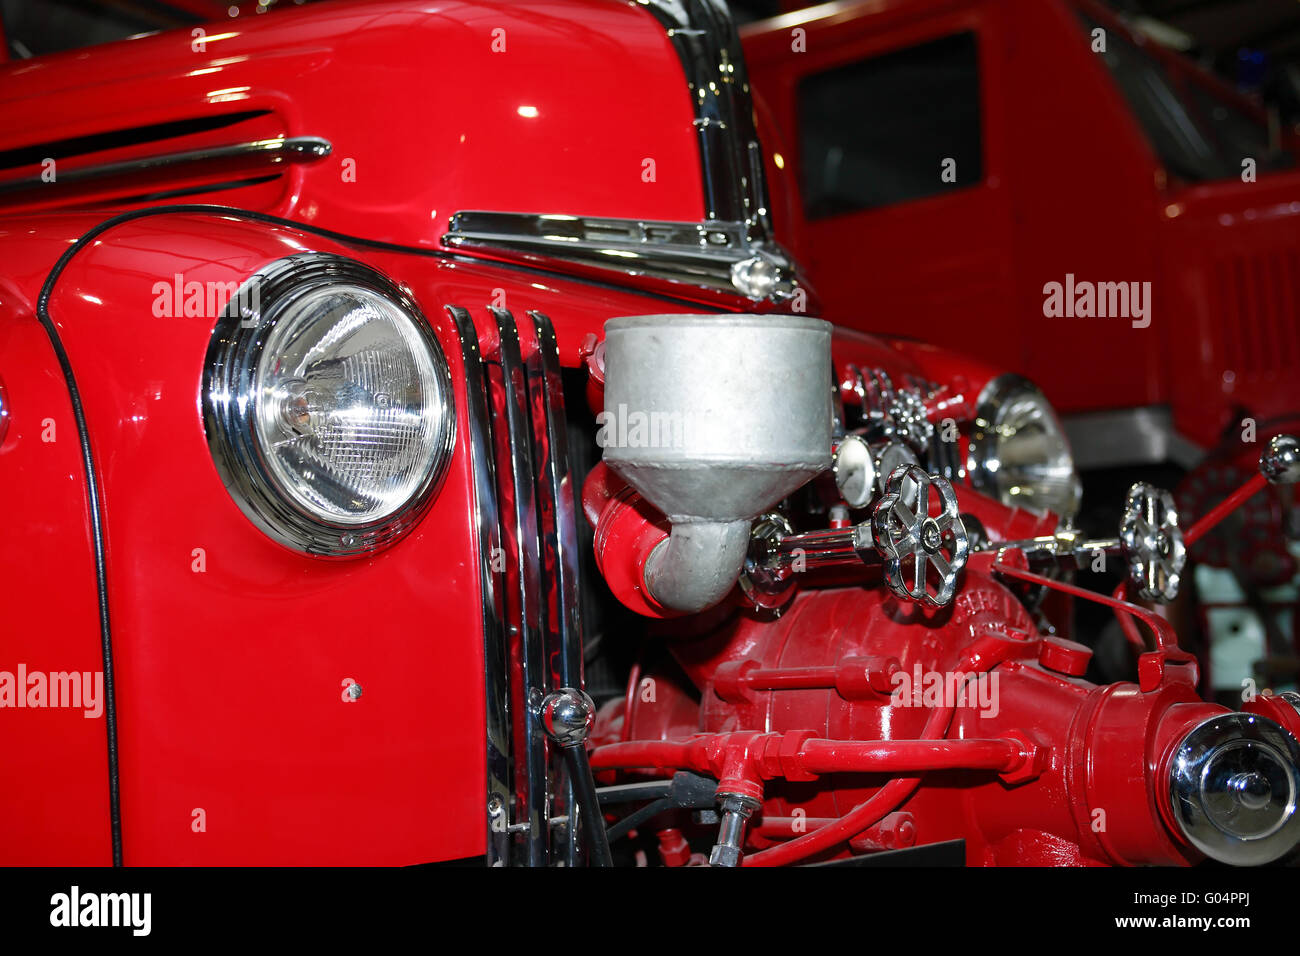 CHERNOGOLOVKA, Russie - le 11 avril 2015 : American vintage fire truck Banque D'Images